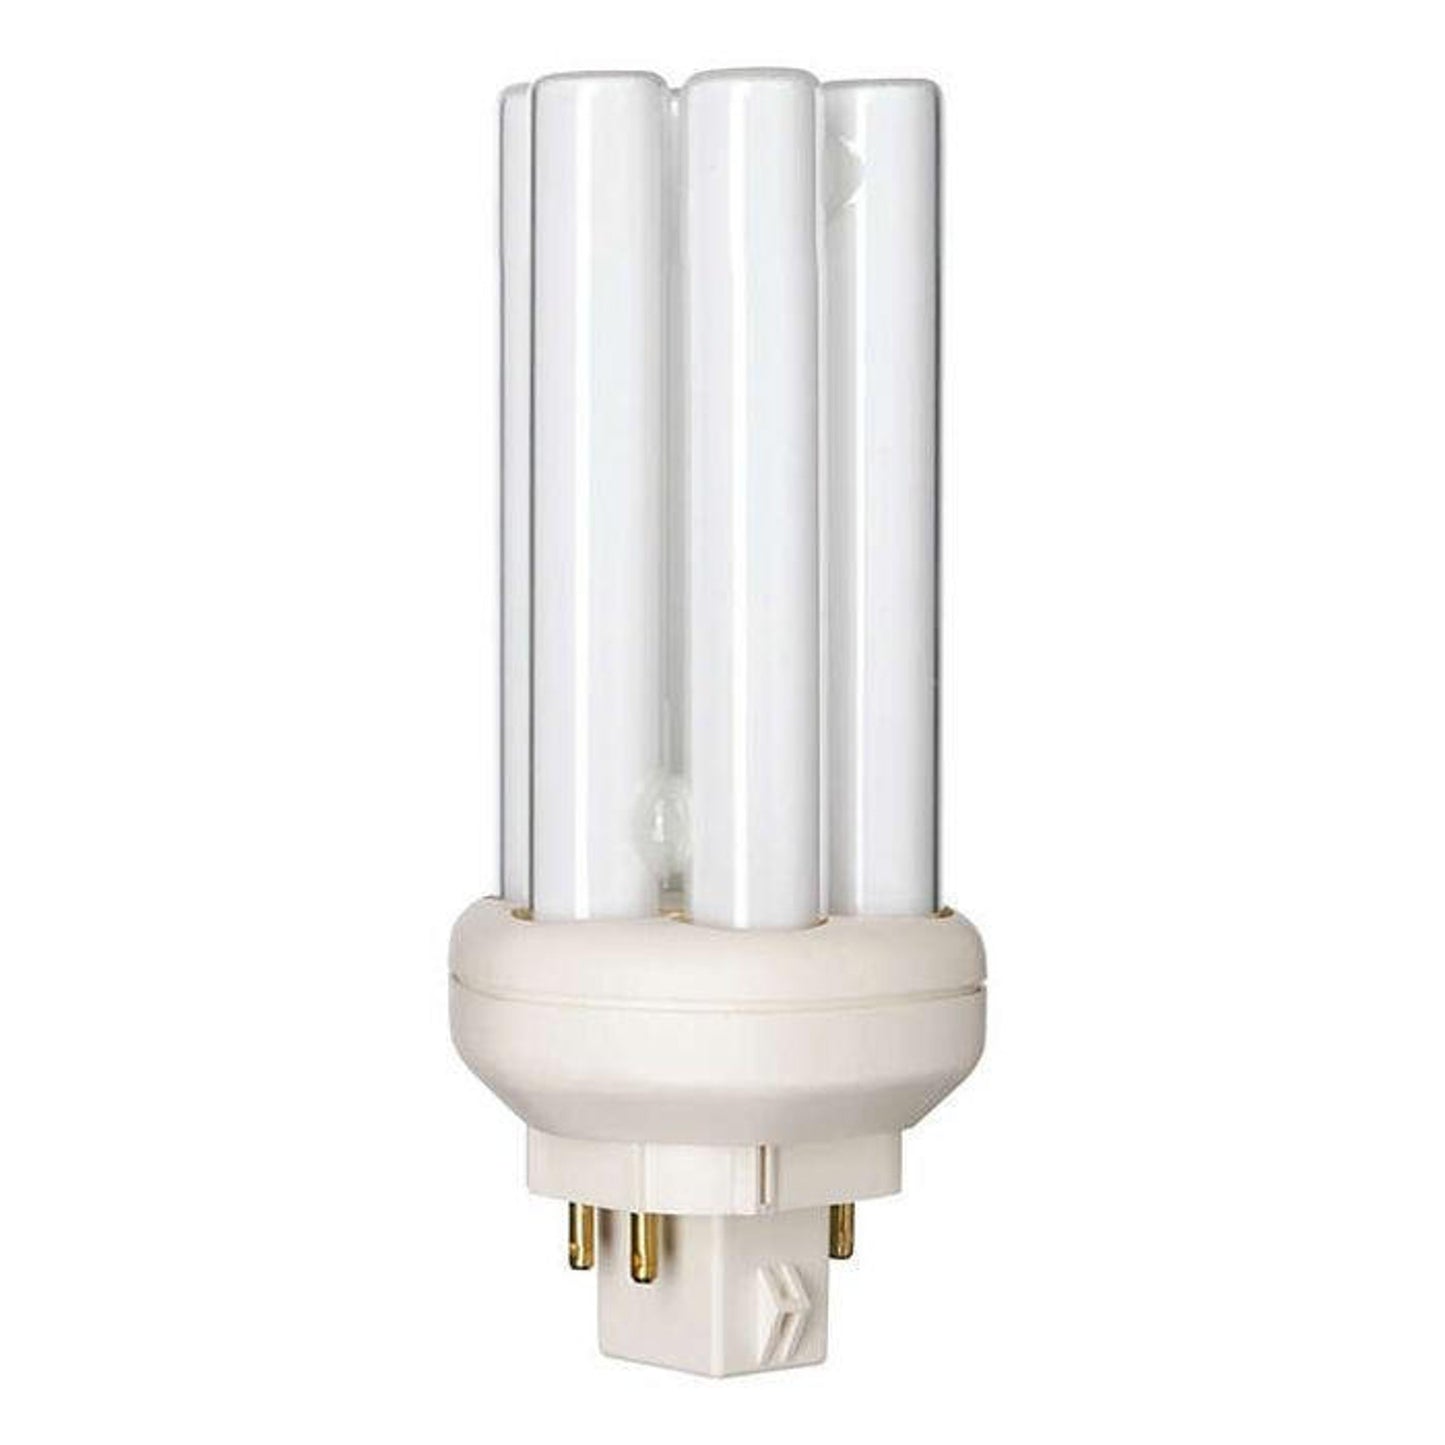 Philips 458273 PL-T 26W/841/A/4P/ALTO 26W CFL Triple Tube 4 Pin 4100K Dimmable